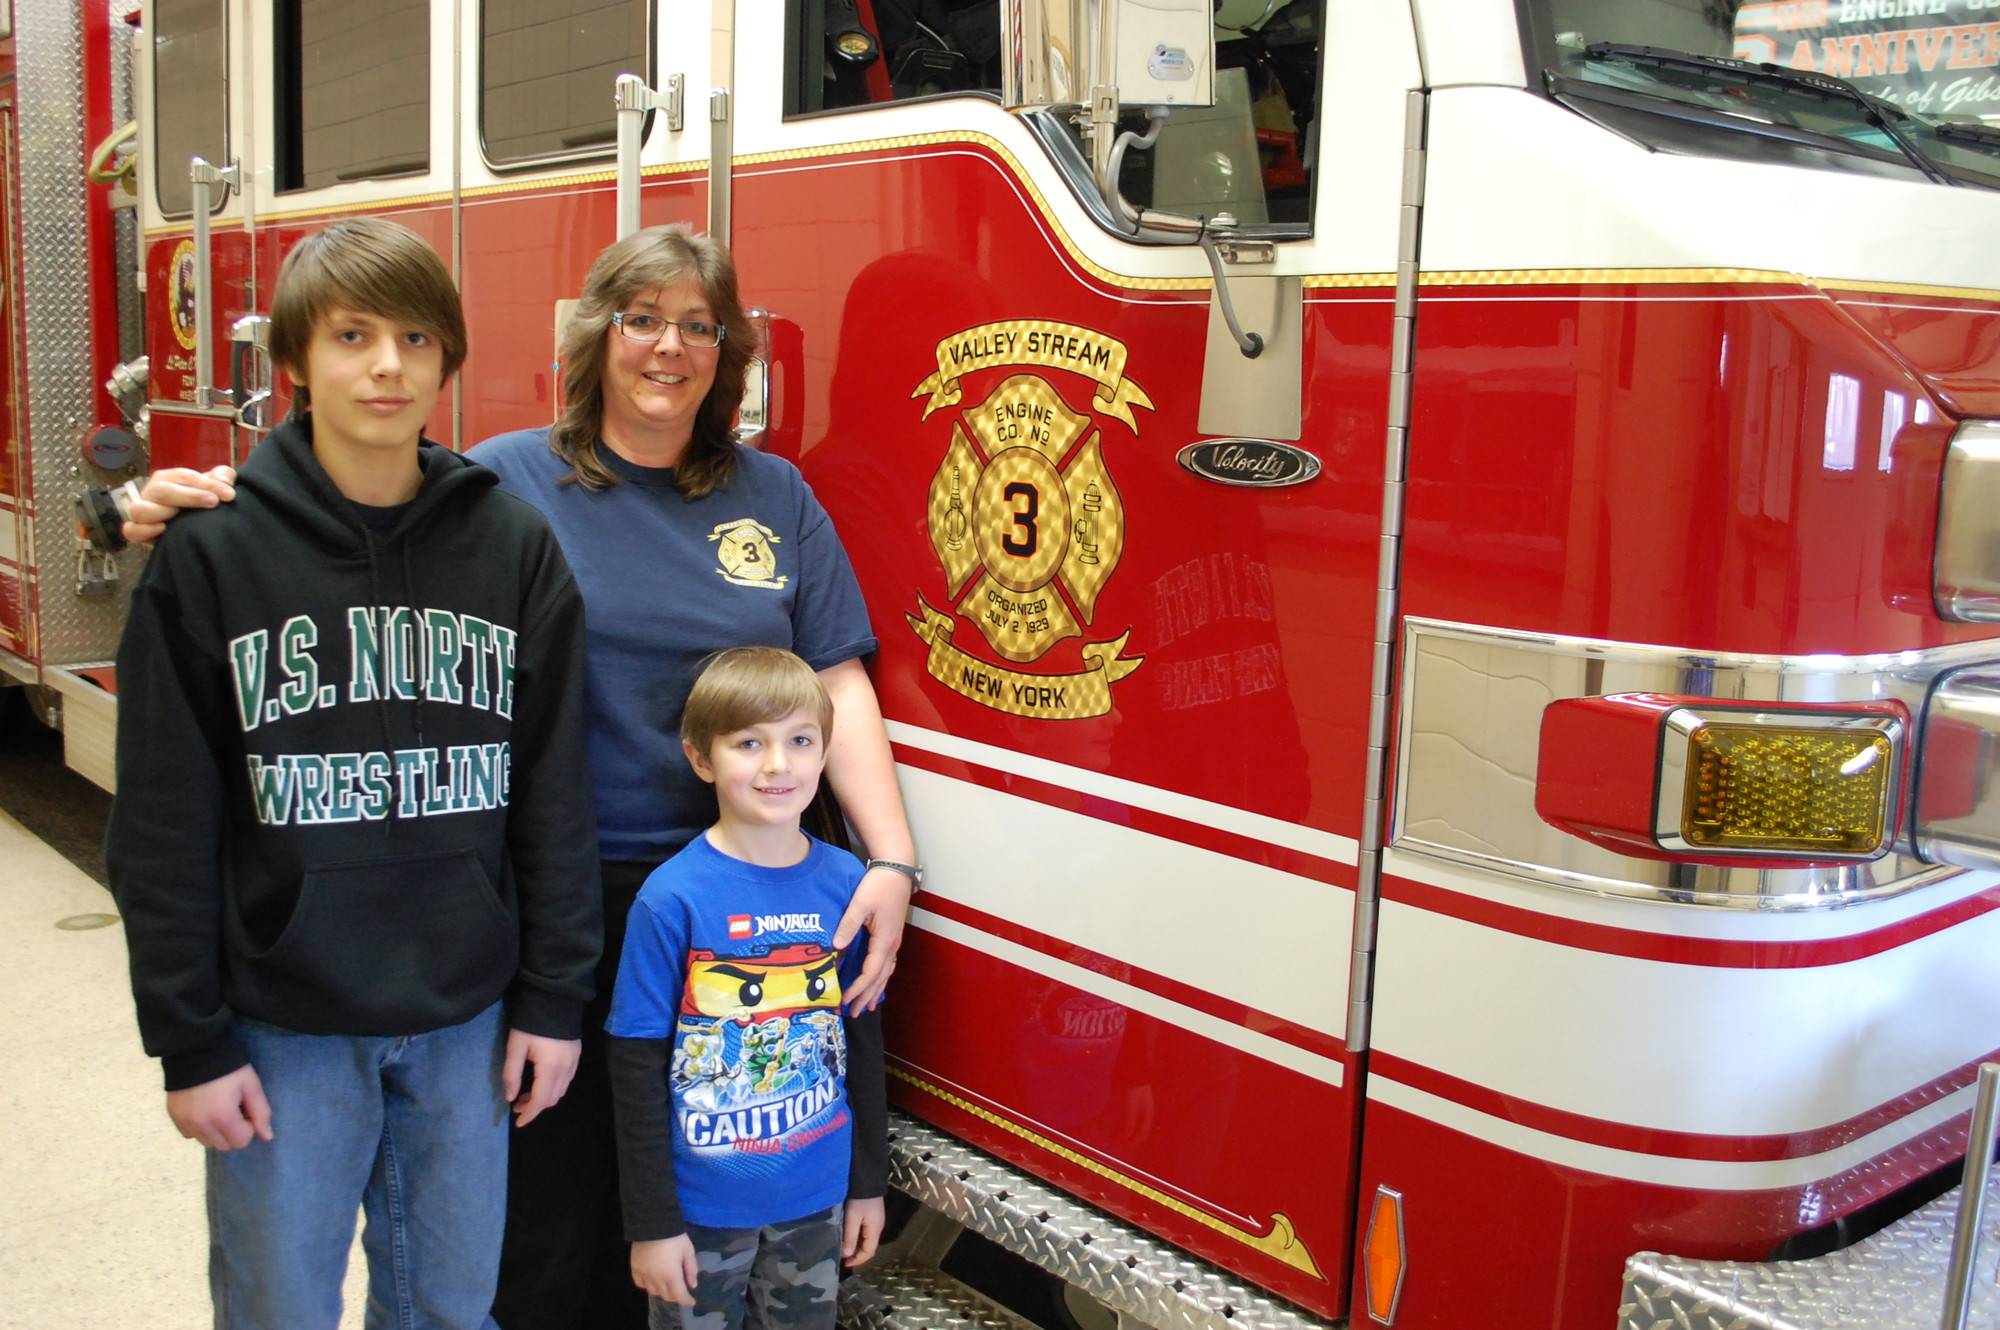 The Cochran Place Firehouse has been Deborah Bove’s second home for 28 years. She is joined at Company 3’s station by her sons Nicholas and Kyle.